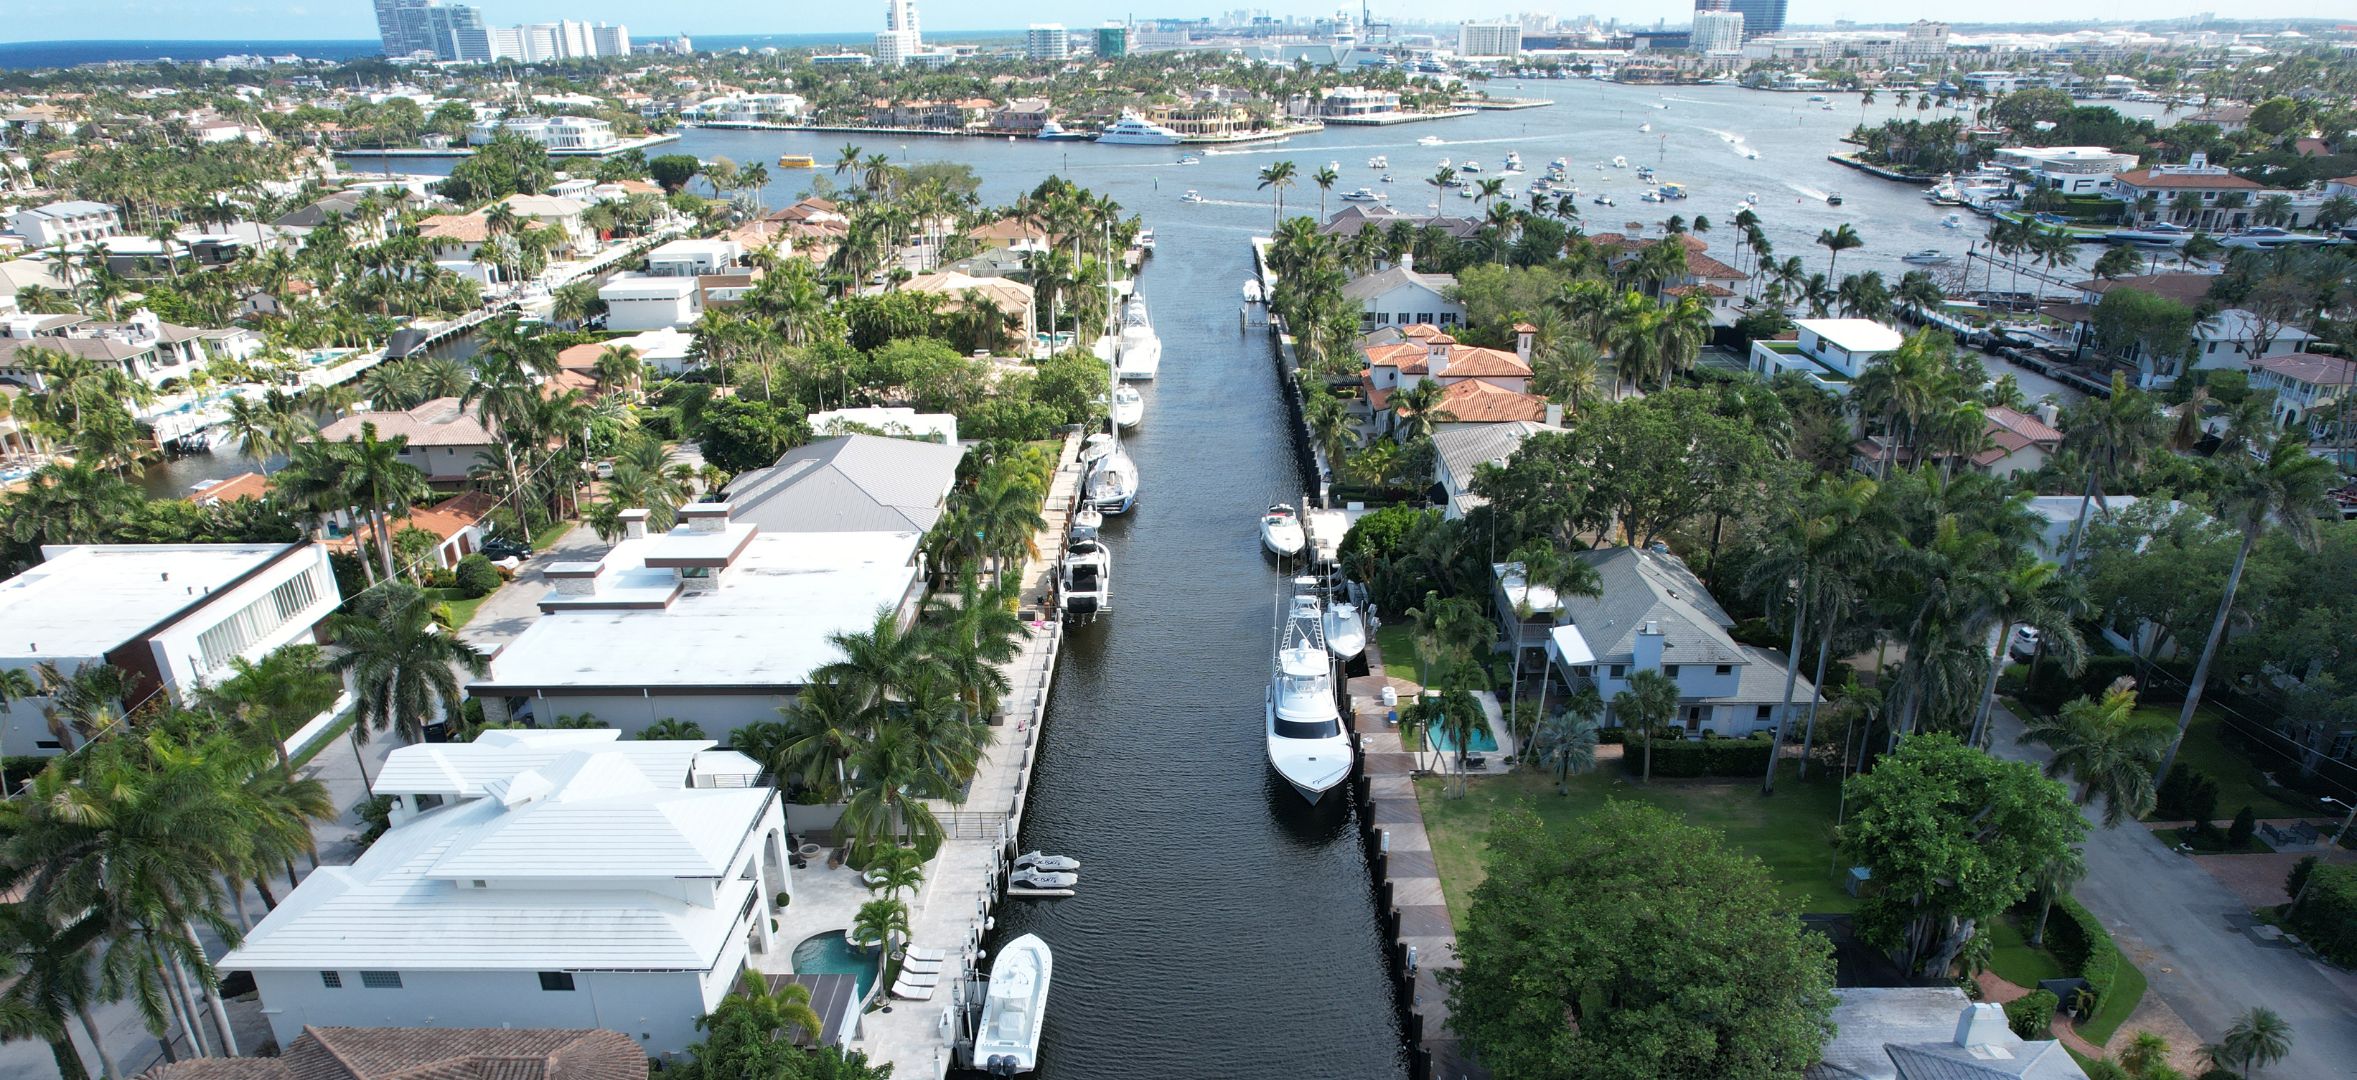 What size boat or yacht can I dock on the Las Olas Isles?